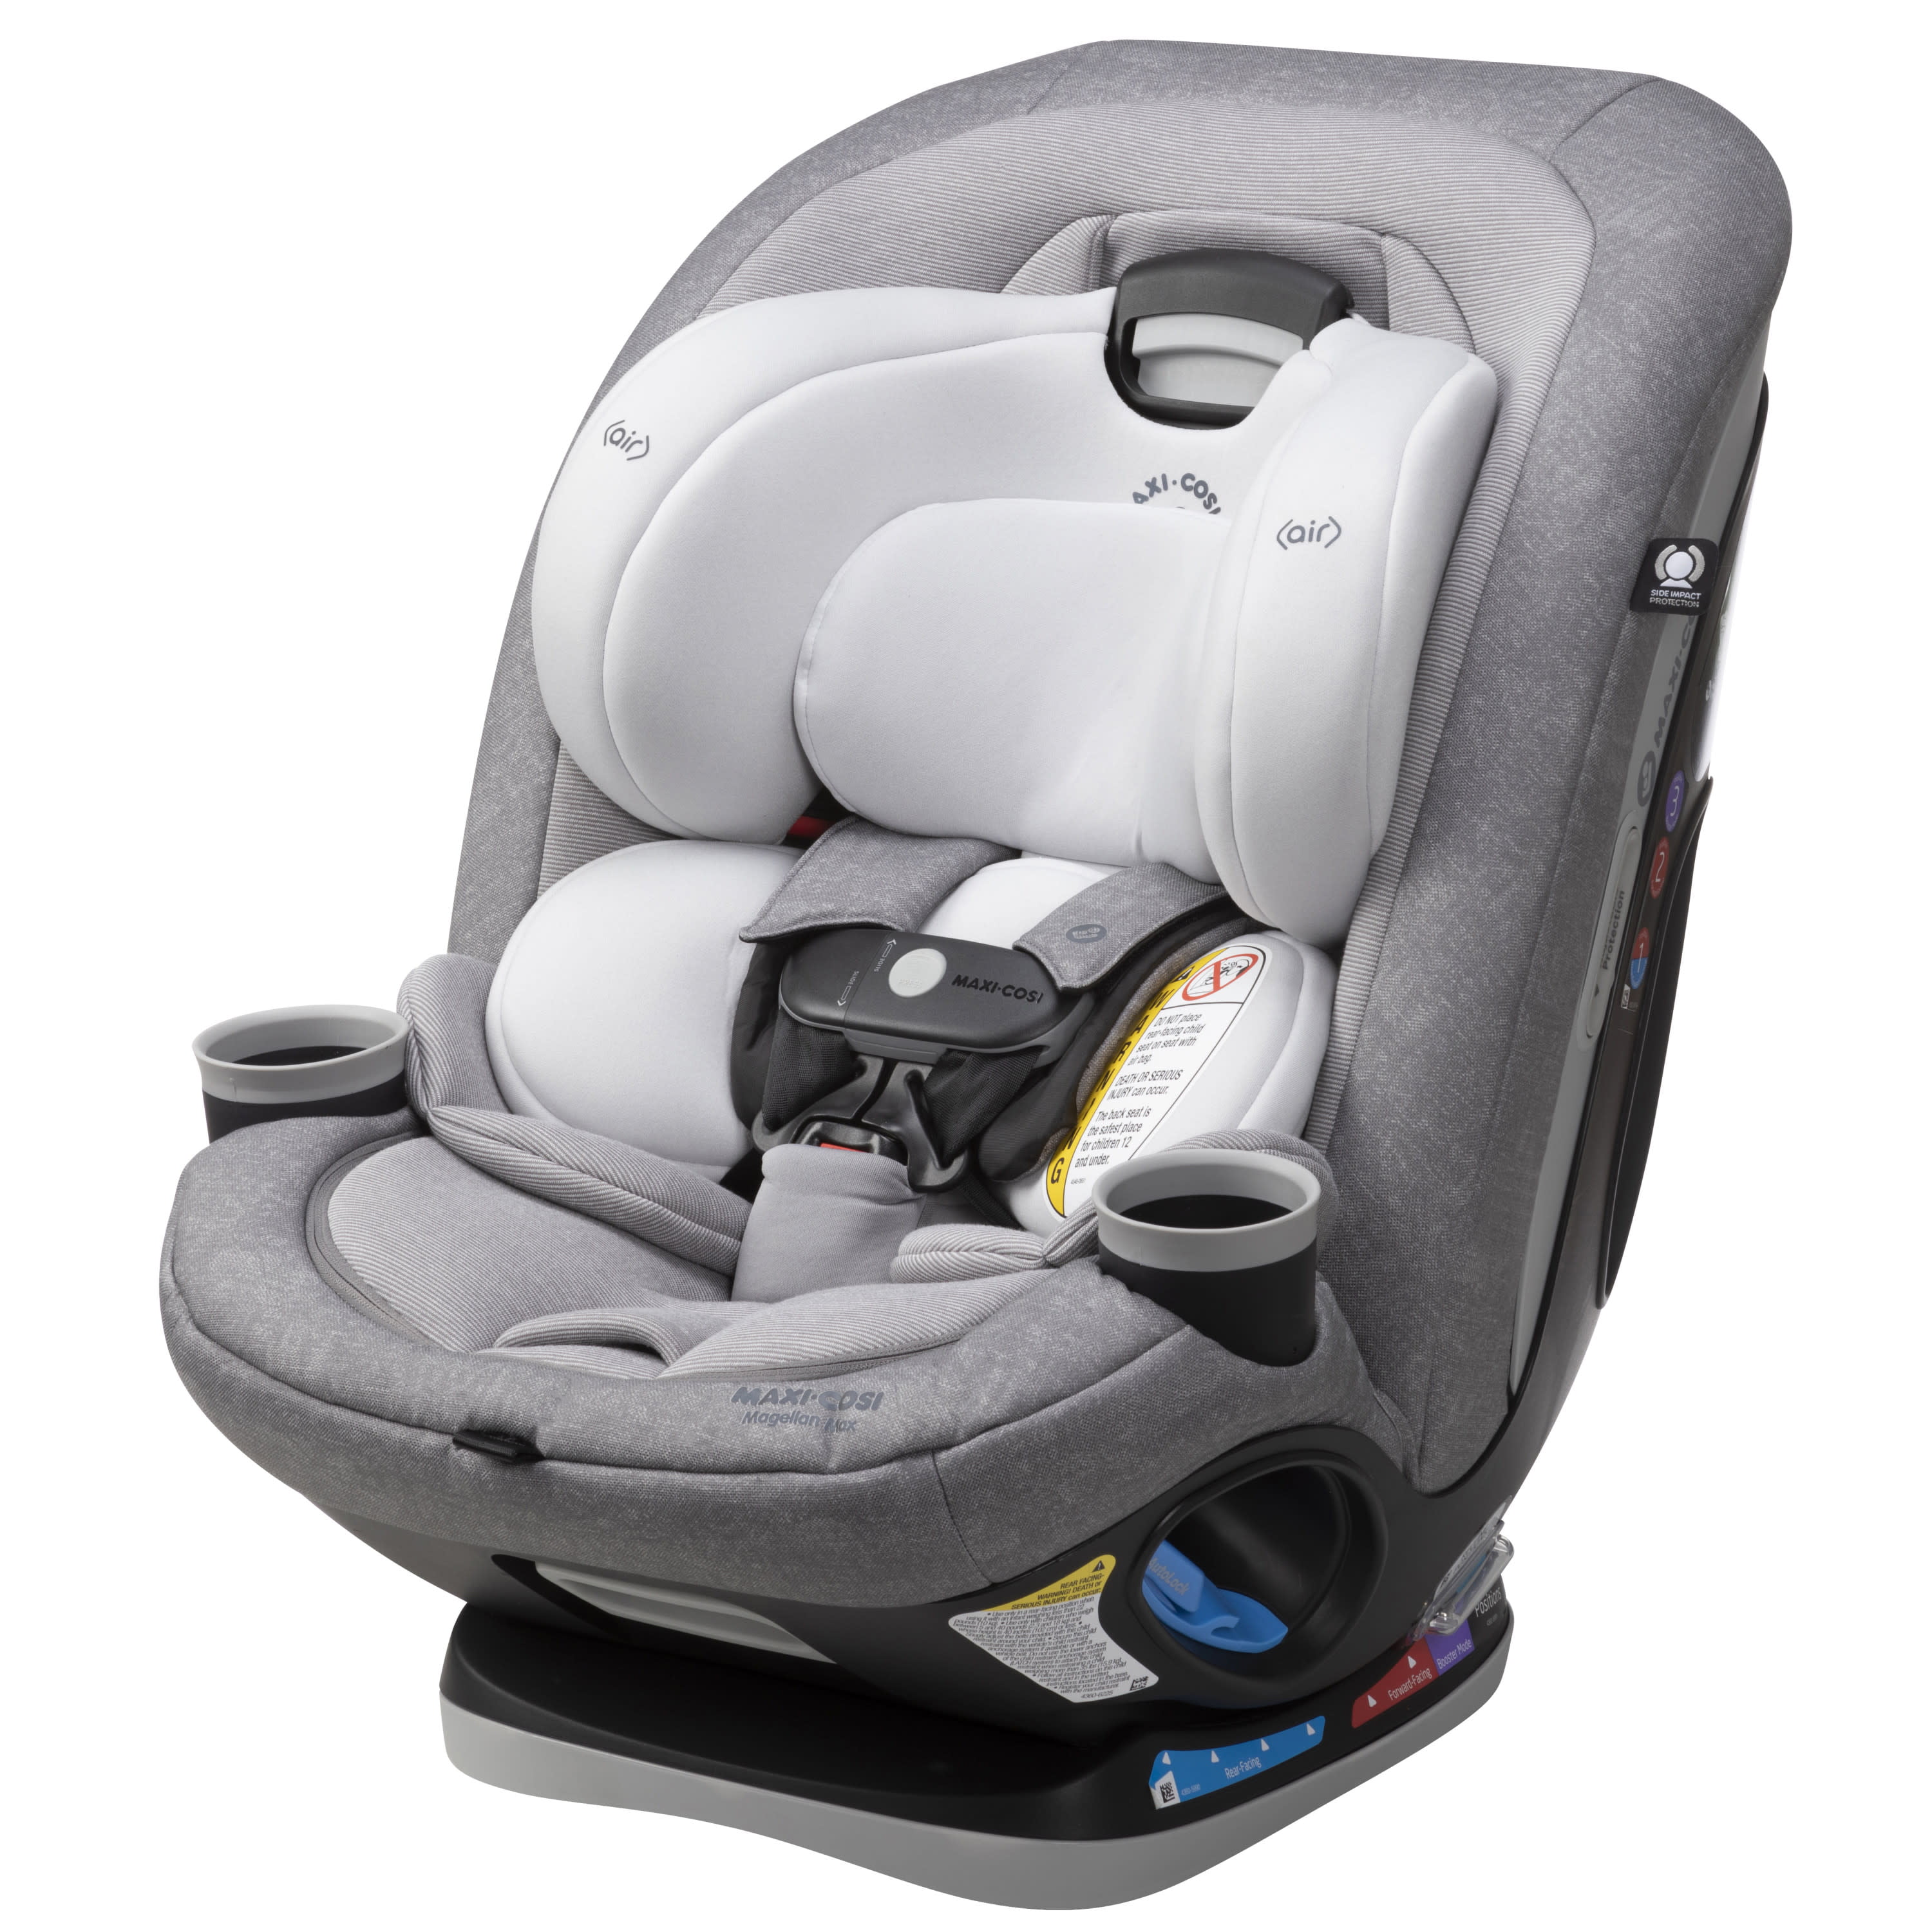 Maxi-Cosi Magellan Xp Max All-in-One Convertible Car Seat One Size Nomad Sand 